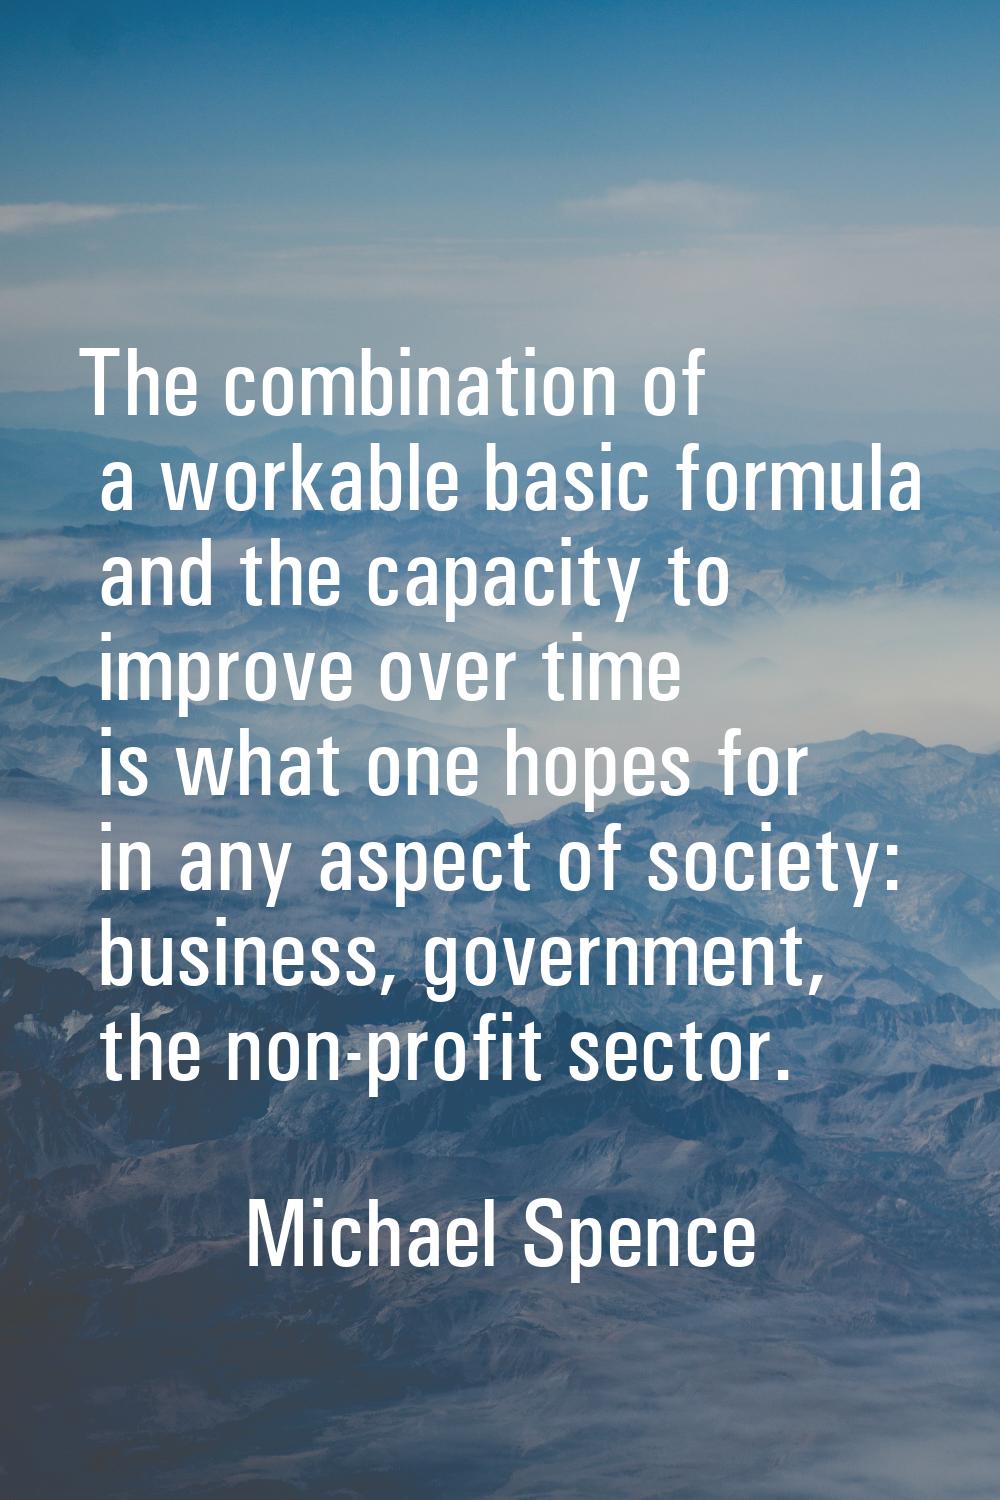 The combination of a workable basic formula and the capacity to improve over time is what one hopes